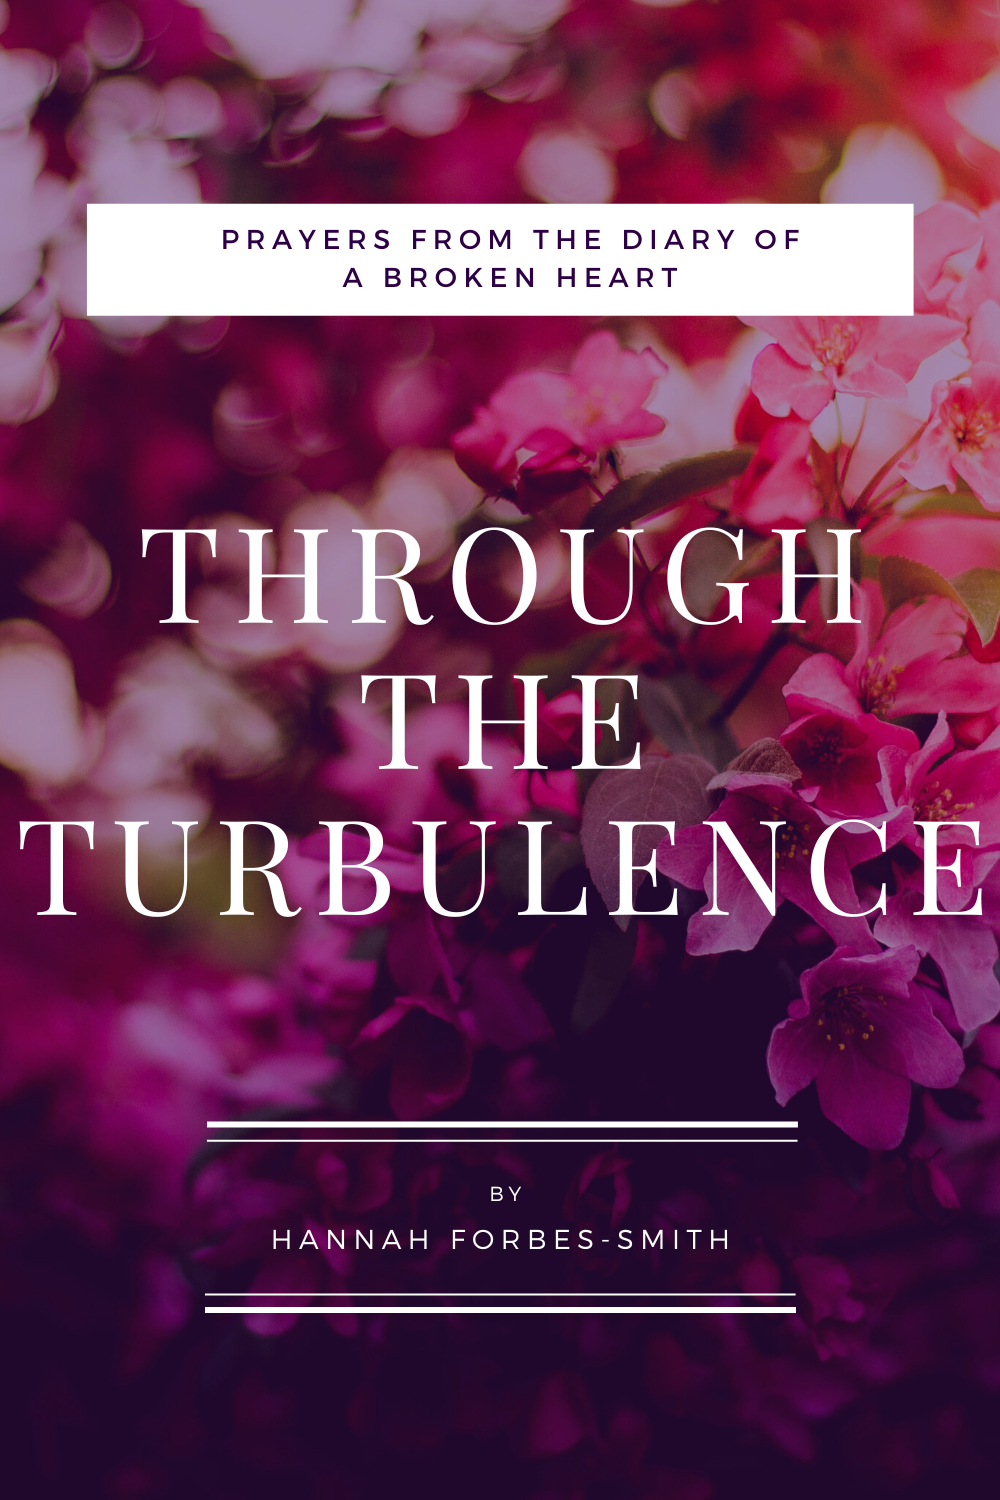 Through the Turbulence: Prayers from the Diary of a Broken Heart